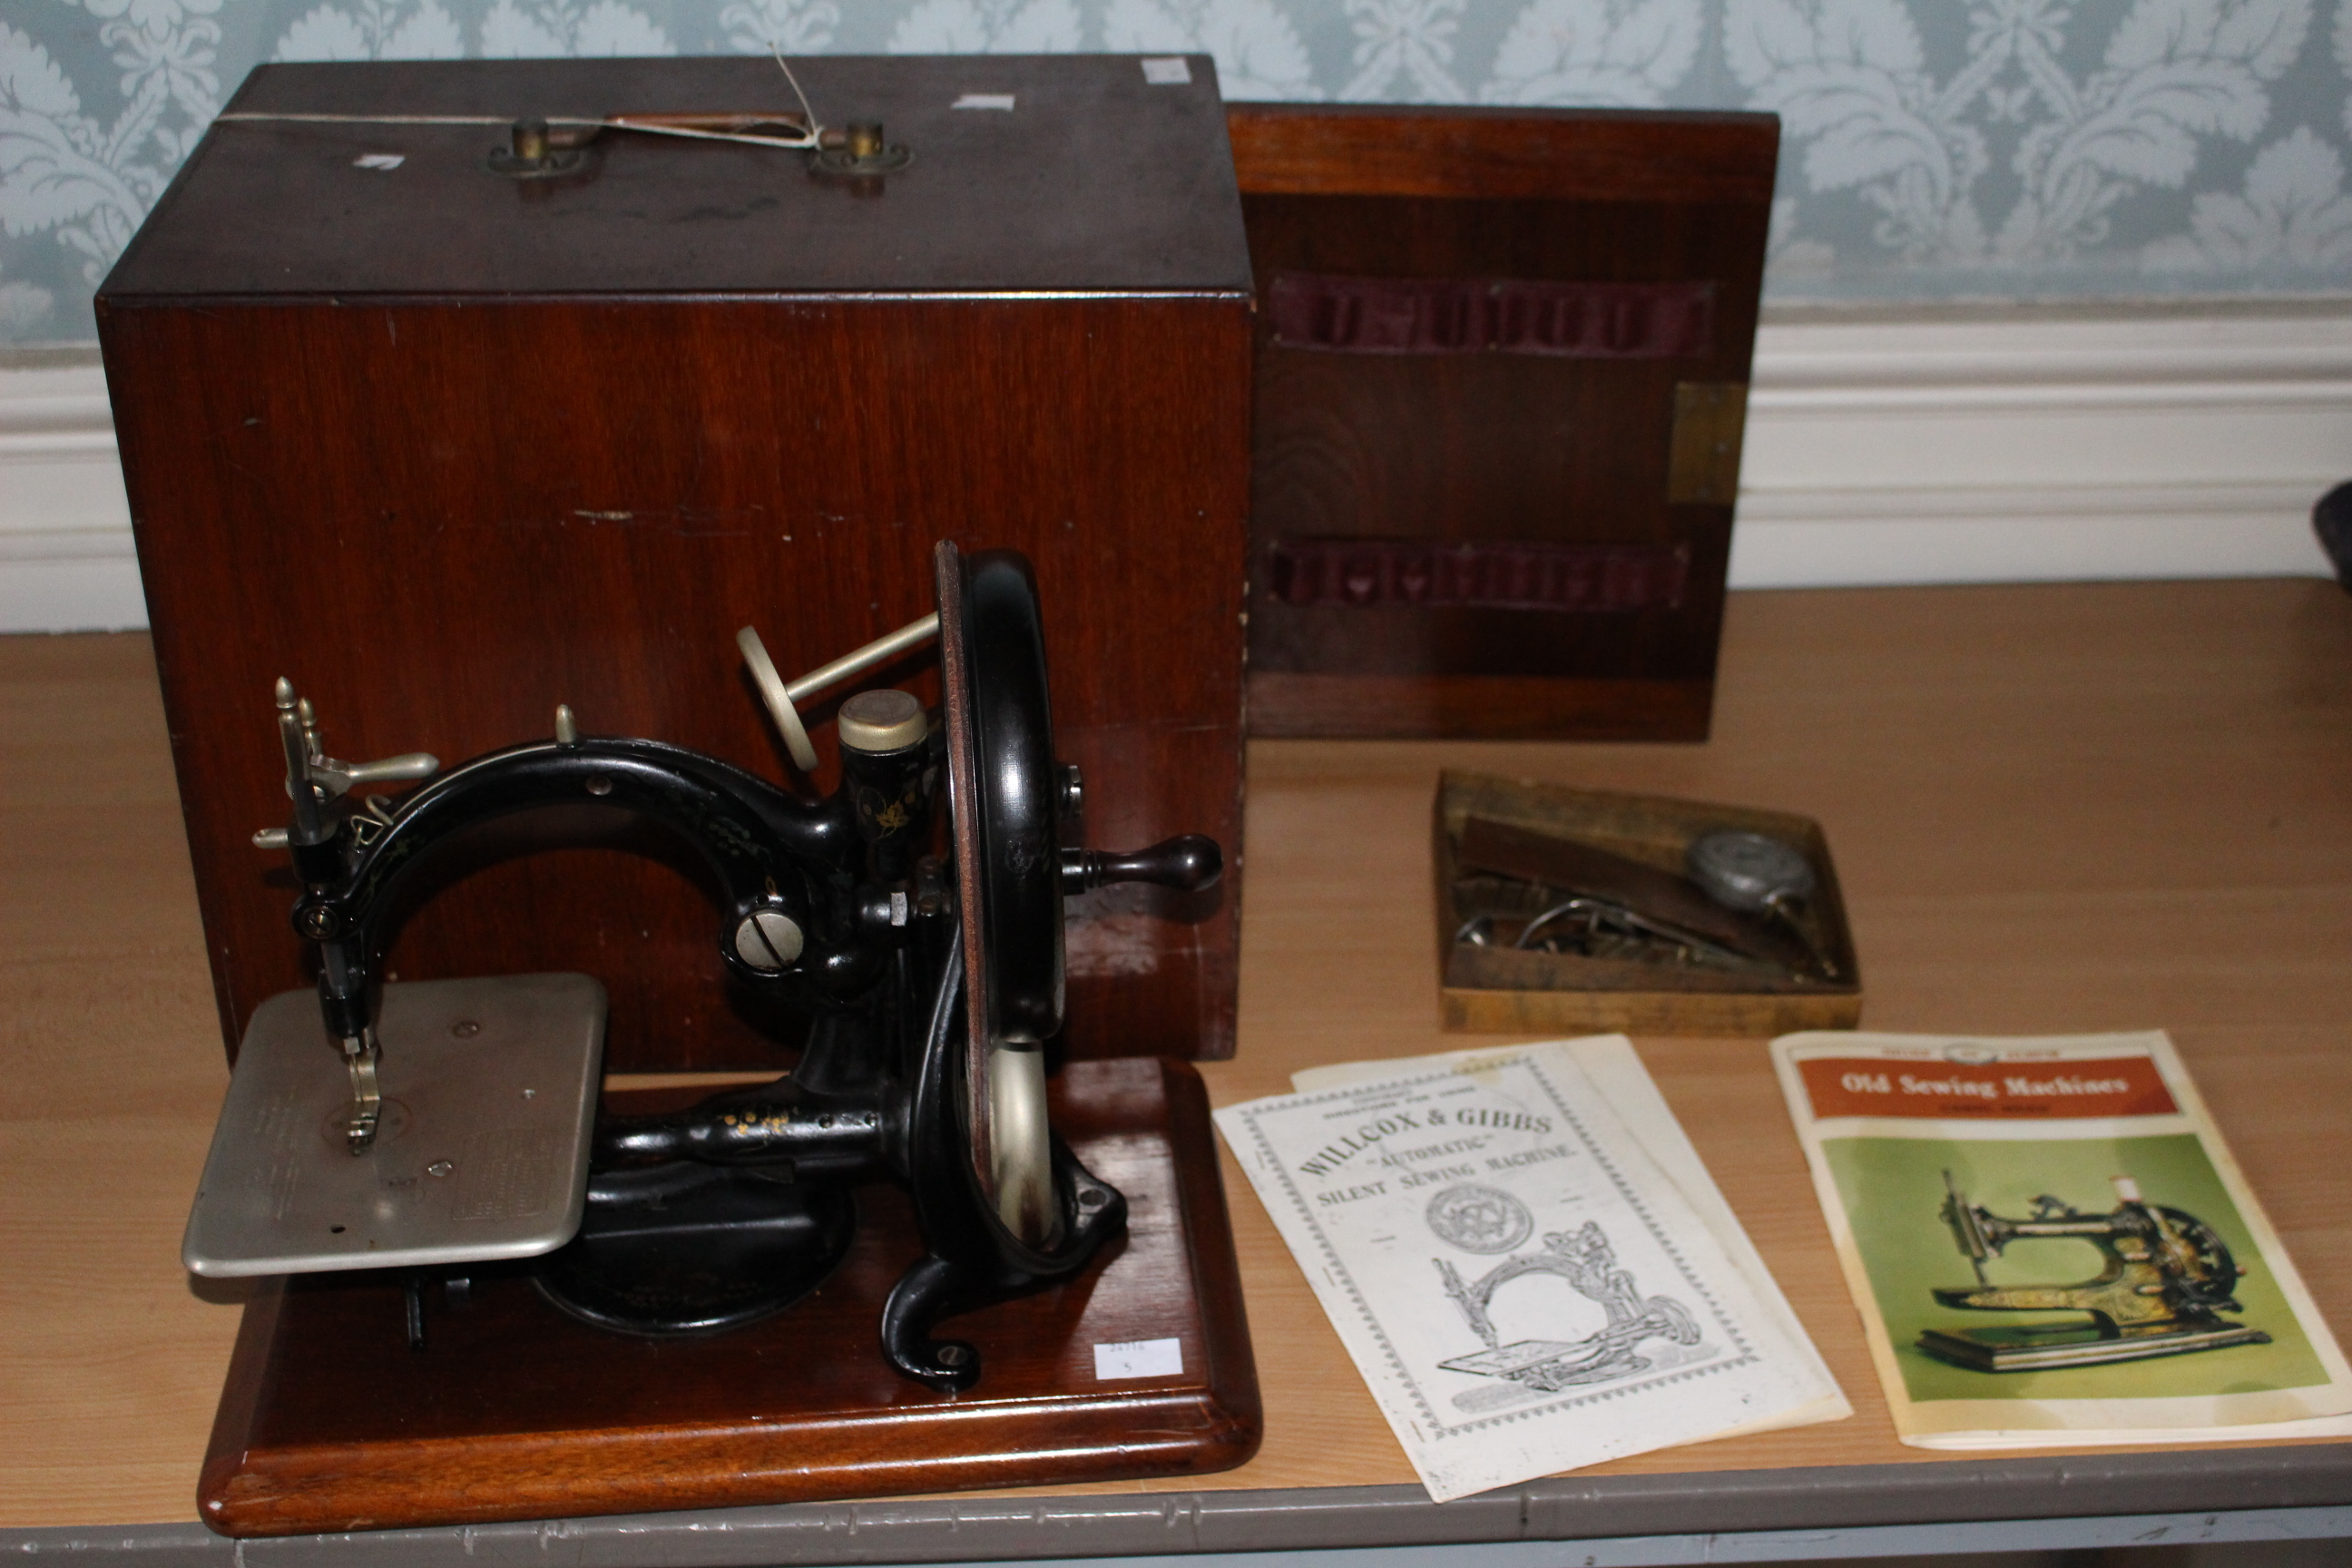 A Willcox and Gibbs silent sewing machine, late 19th century with lockable box and instructions